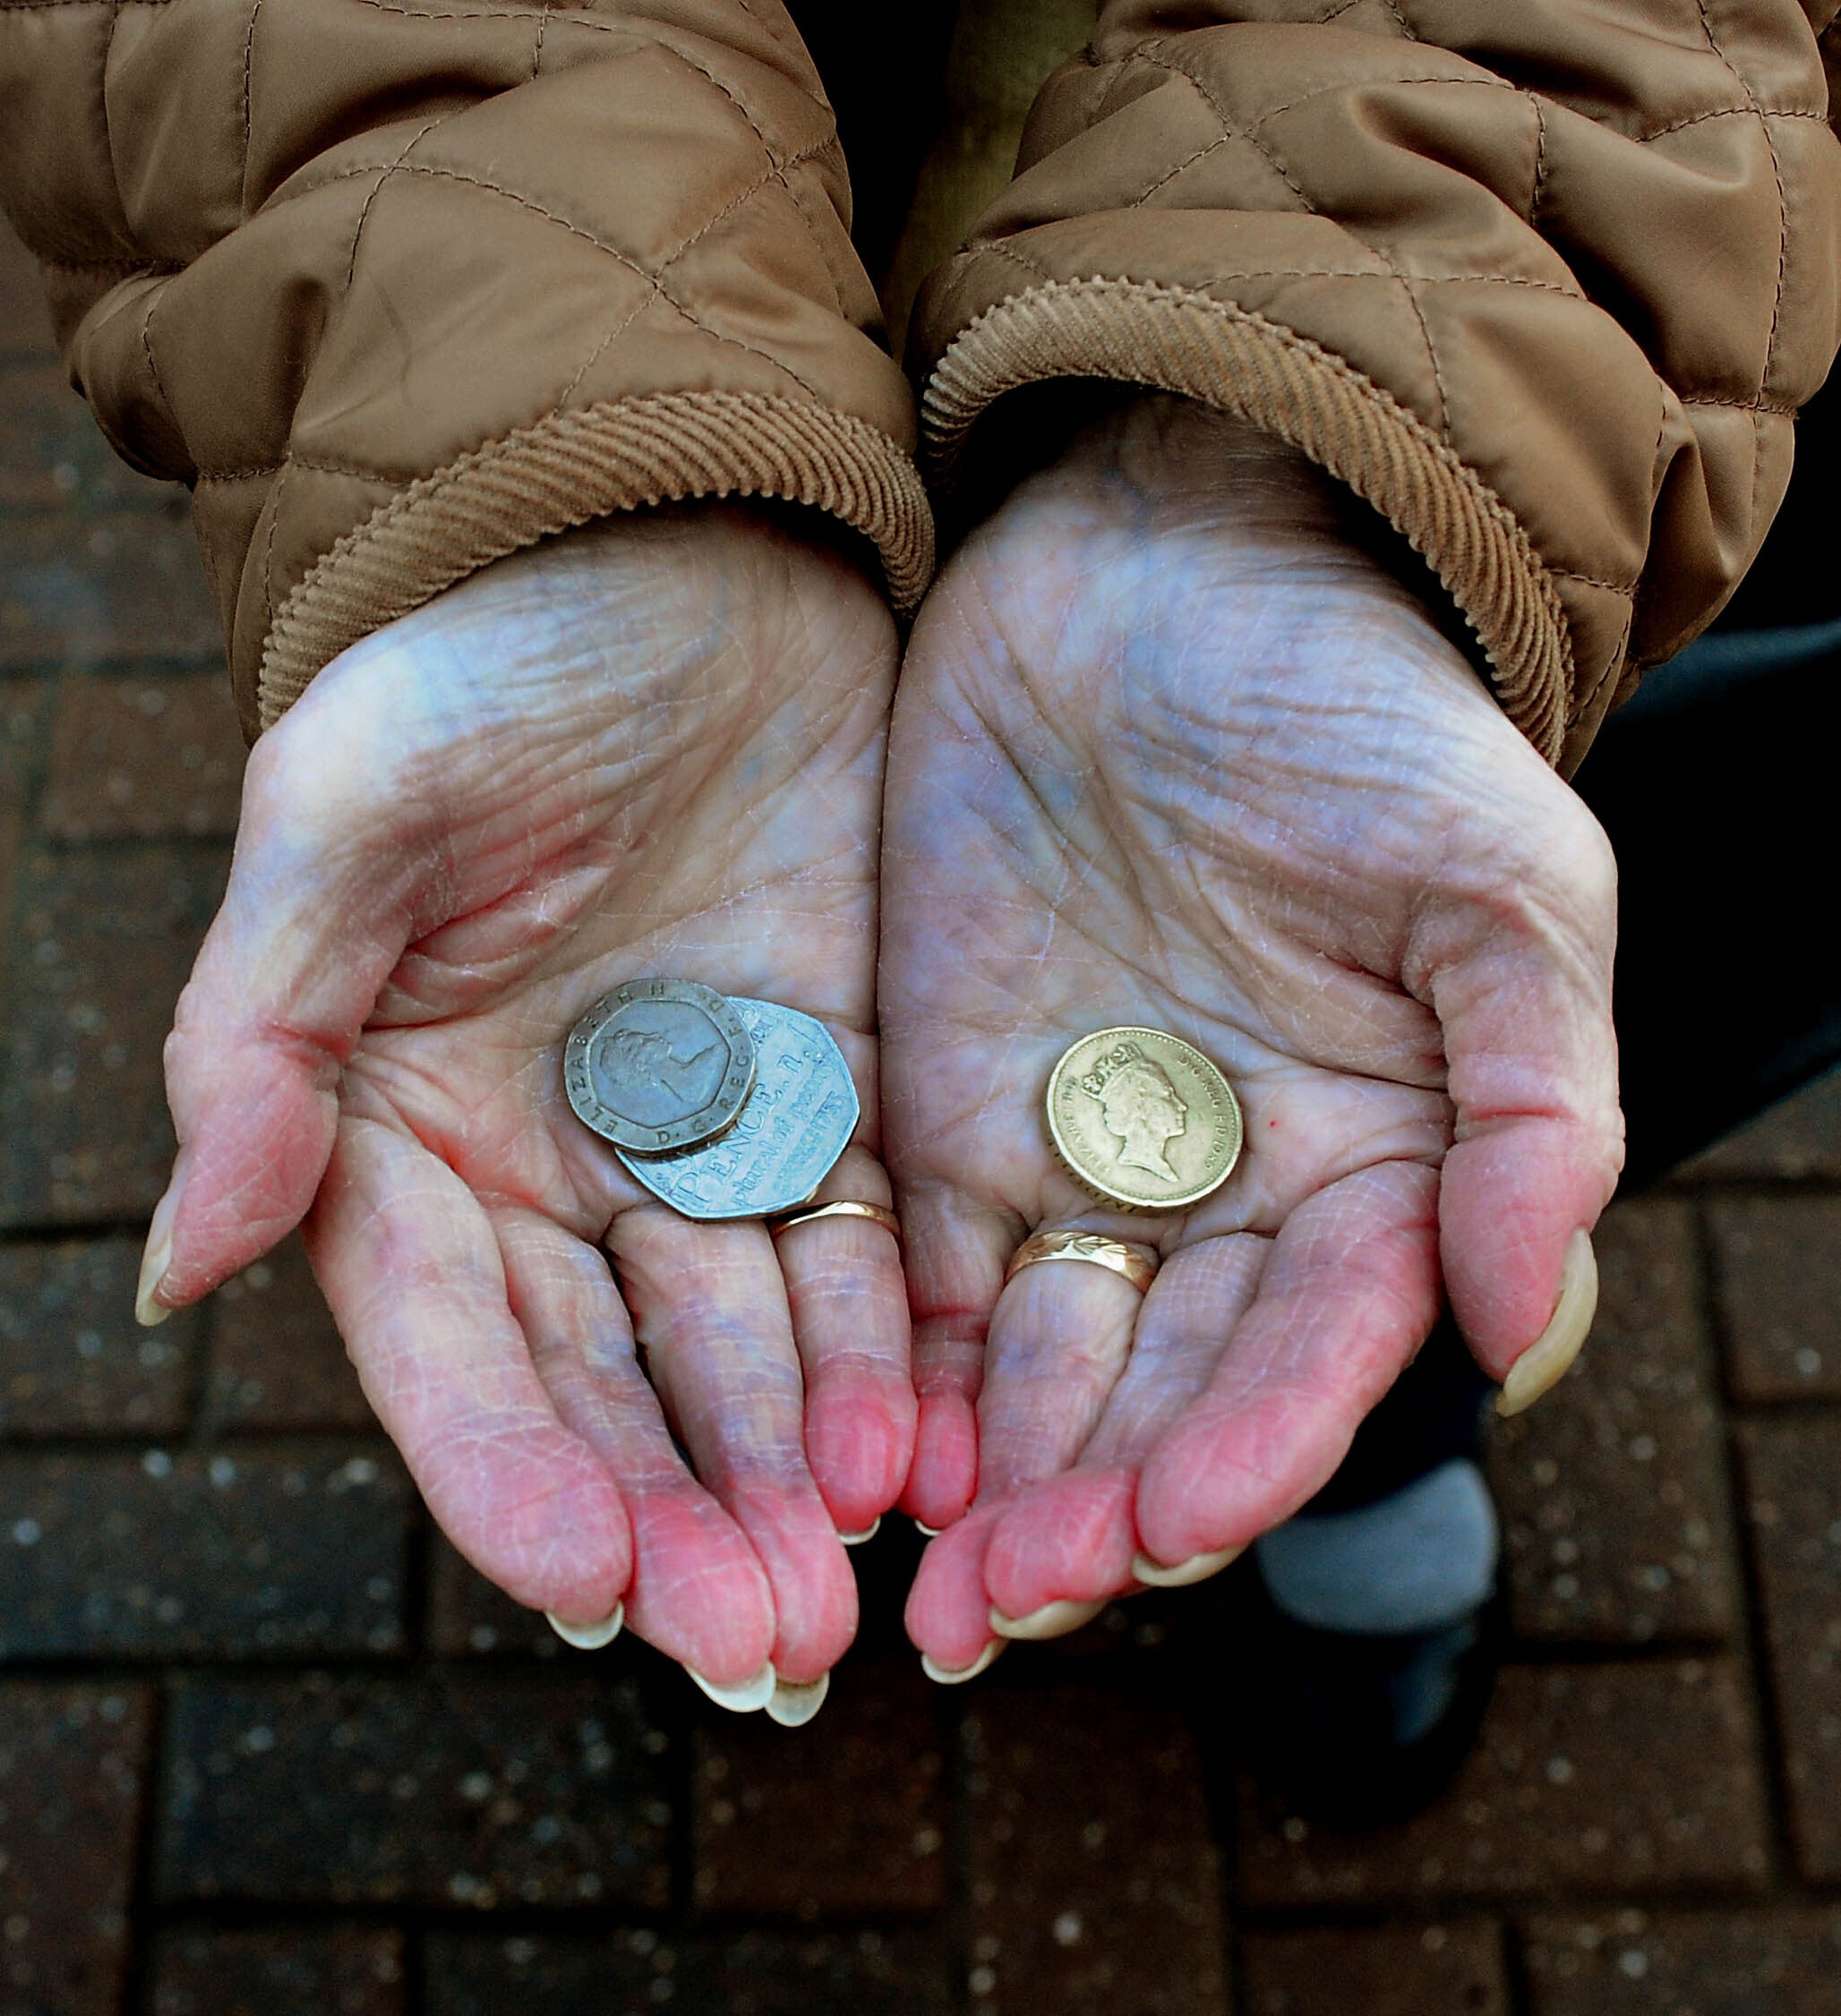 Some 2.8m people from ‘under-pensioned’ groups are now missing out on workplace pension saving, according to a report (Rui Vieira/PA)